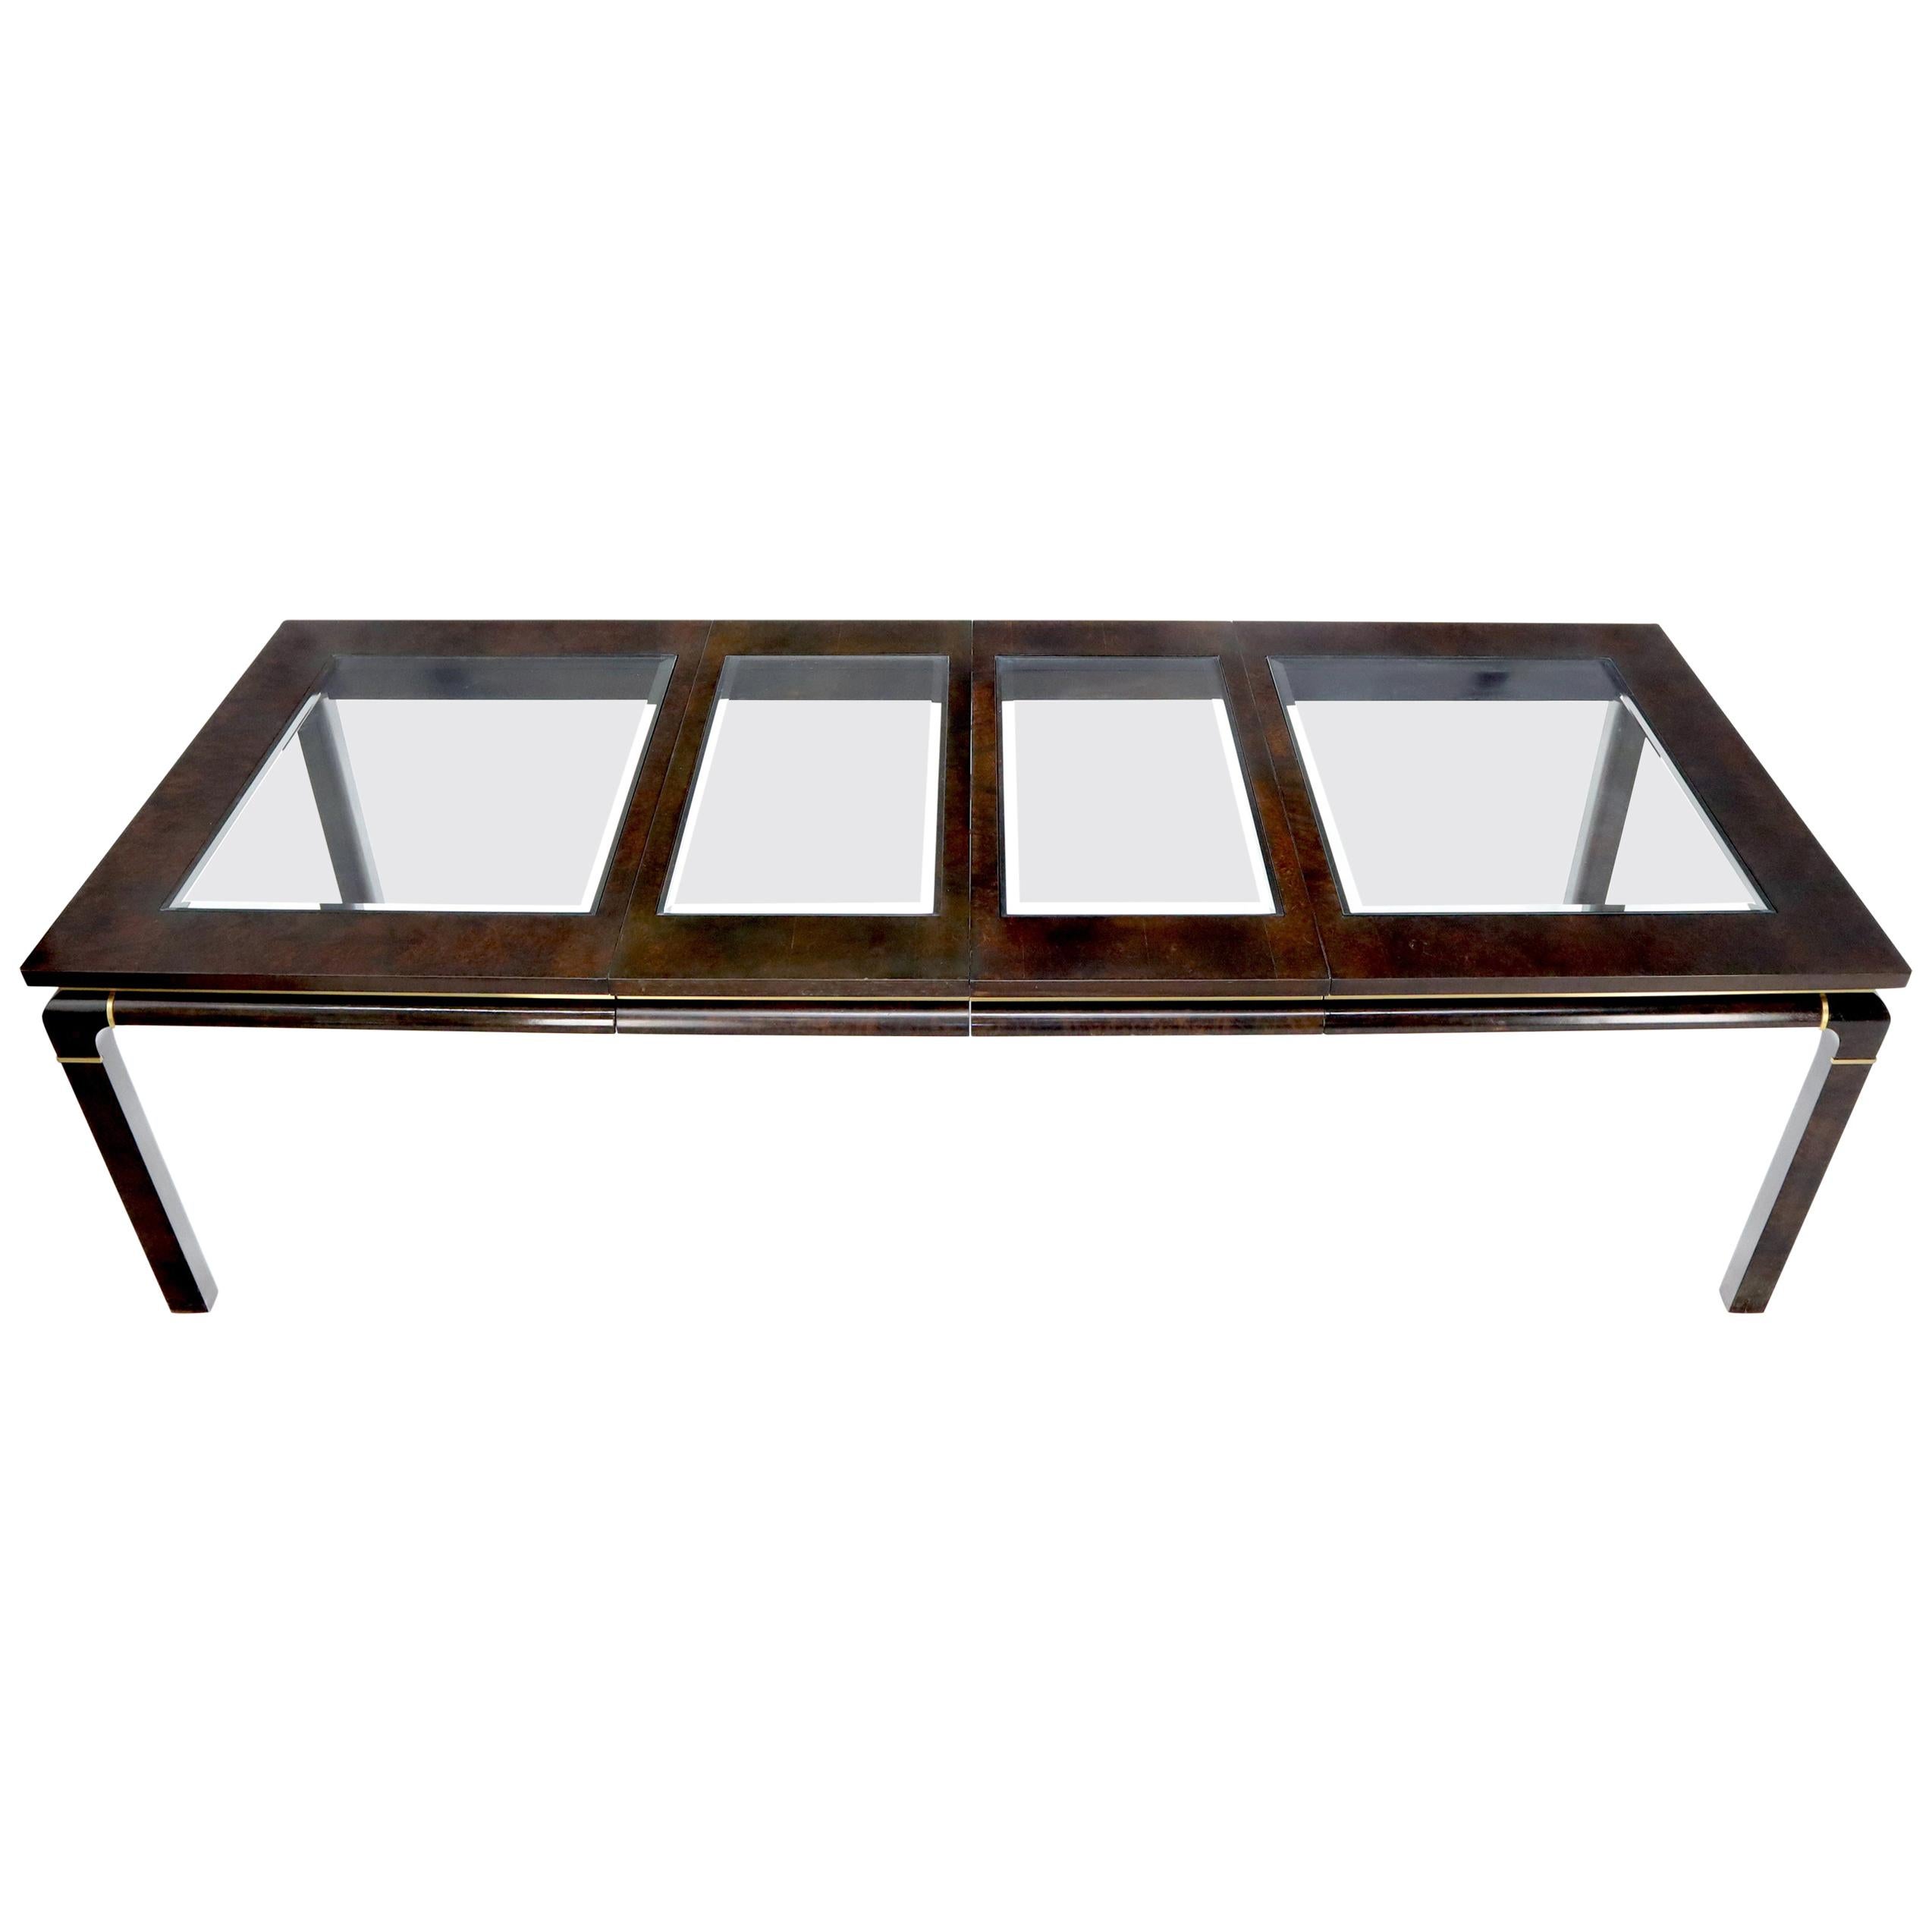 Dark Burl Wood Glass Top Inserts Two Extension boards Leaves Dining Table For Sale